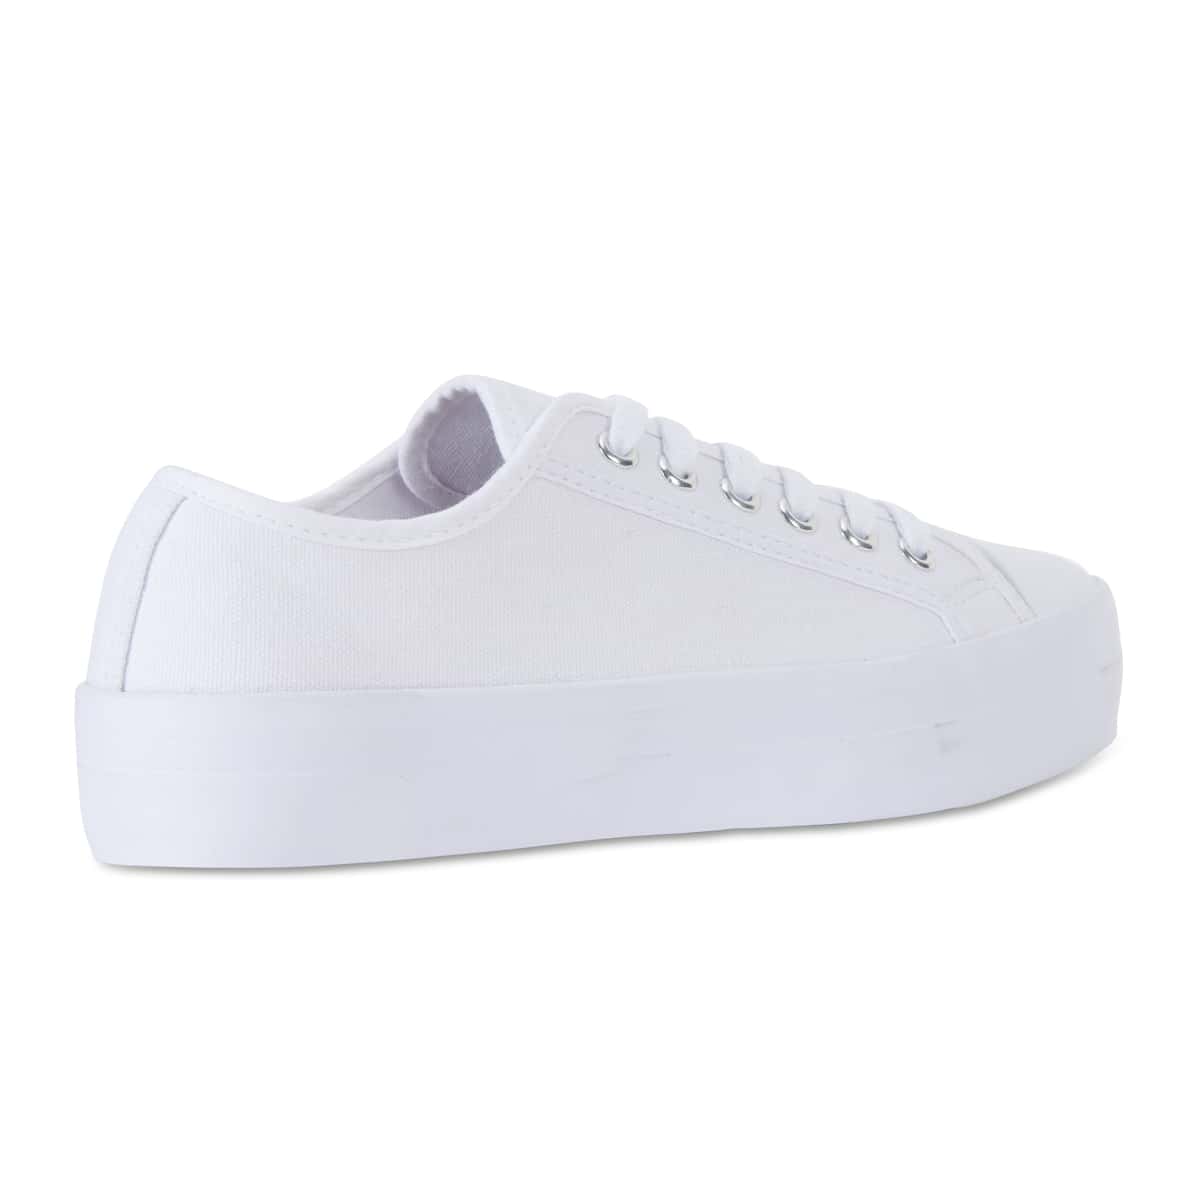 Stacey Sneaker in White Canvas